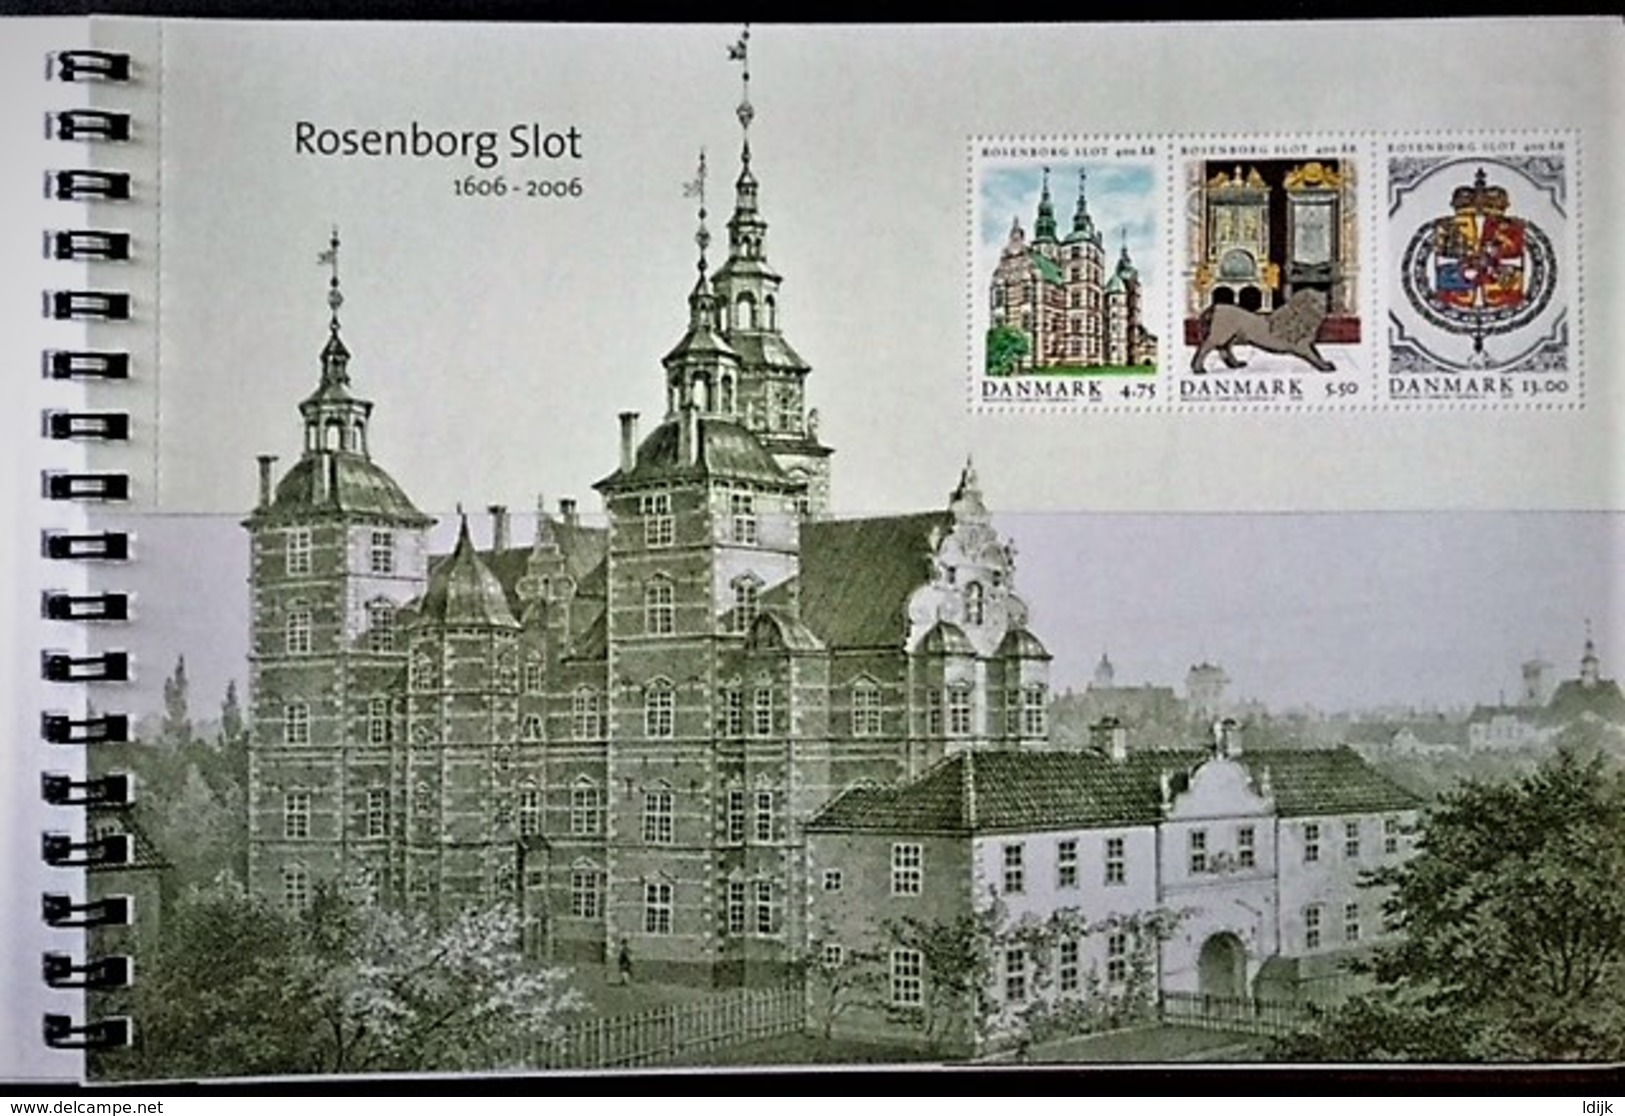 2006 400th Anniversary Of Rosenborg Castle- Prestige Booklet Facit HP4 With 2x 1451-1453 In 4 Mini-sheets/HBL1-4 - Neufs